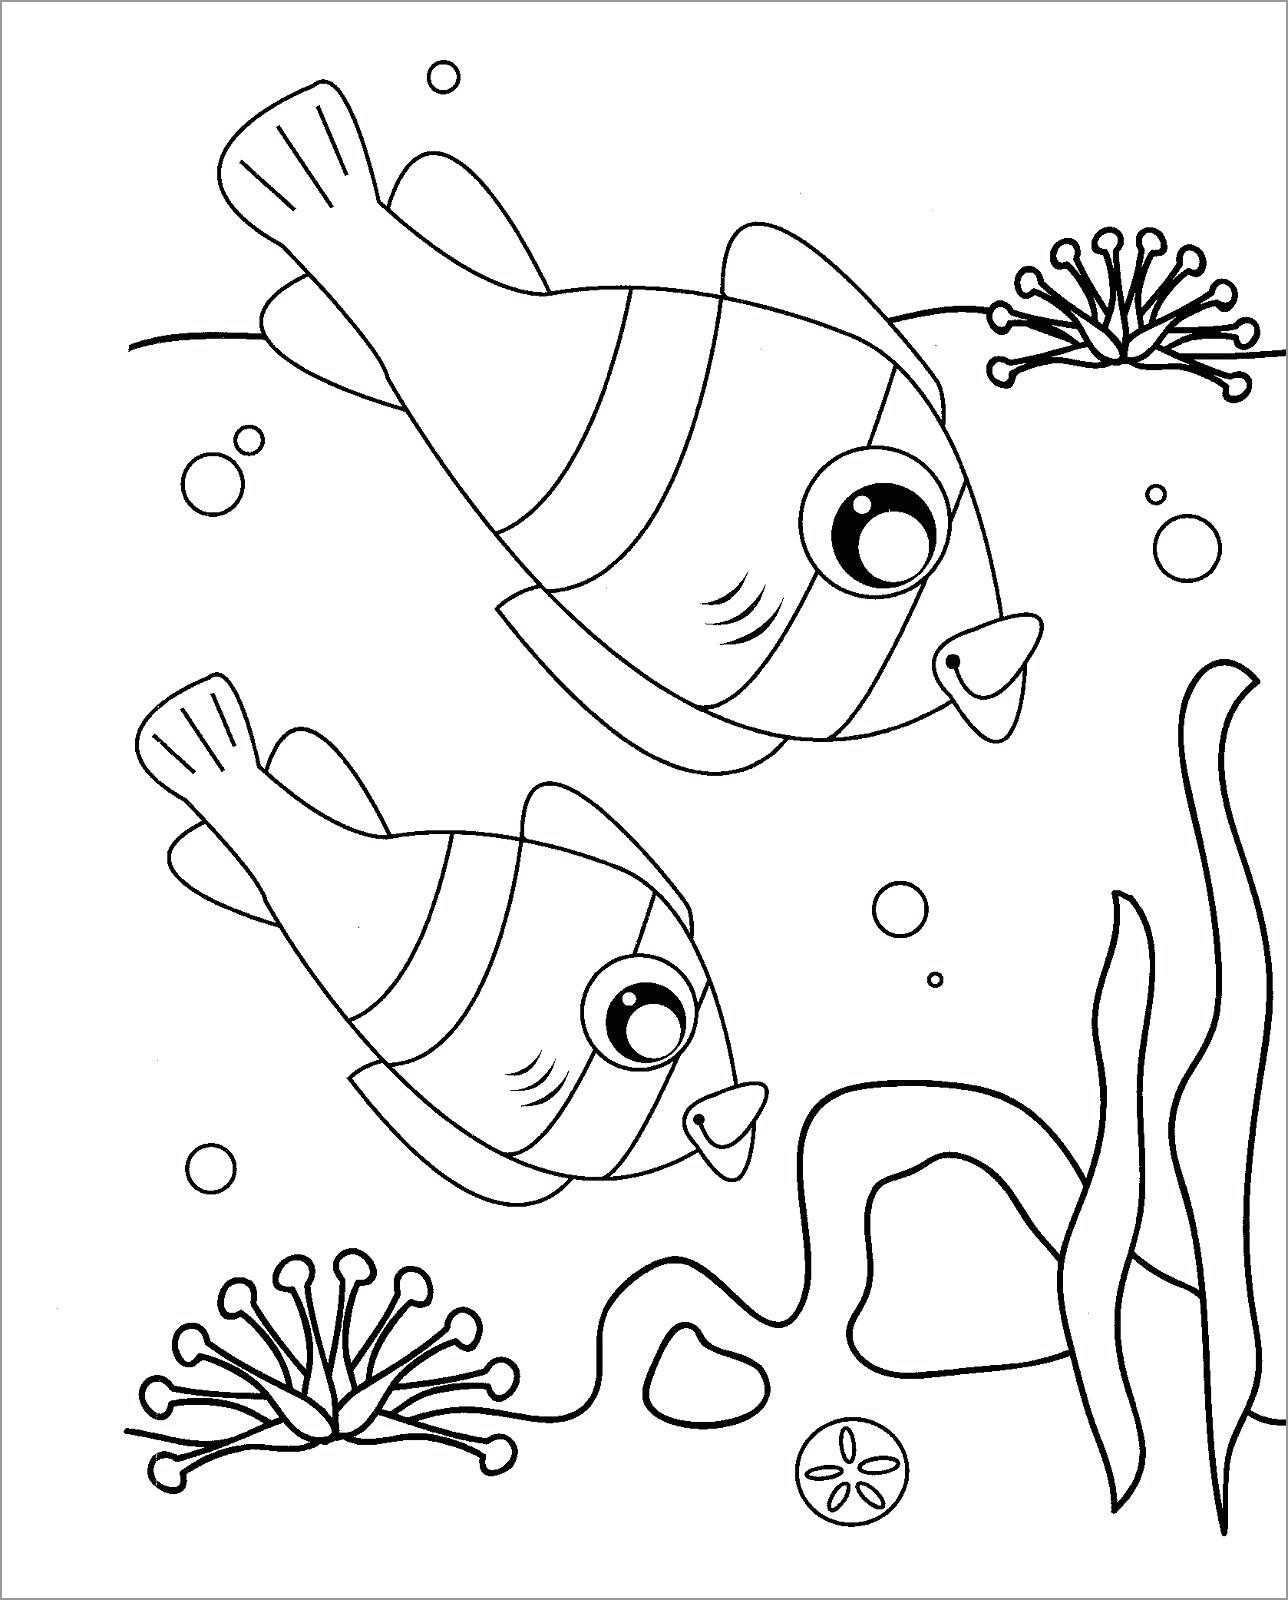 Clownfish Coloring Pages - ColoringBay